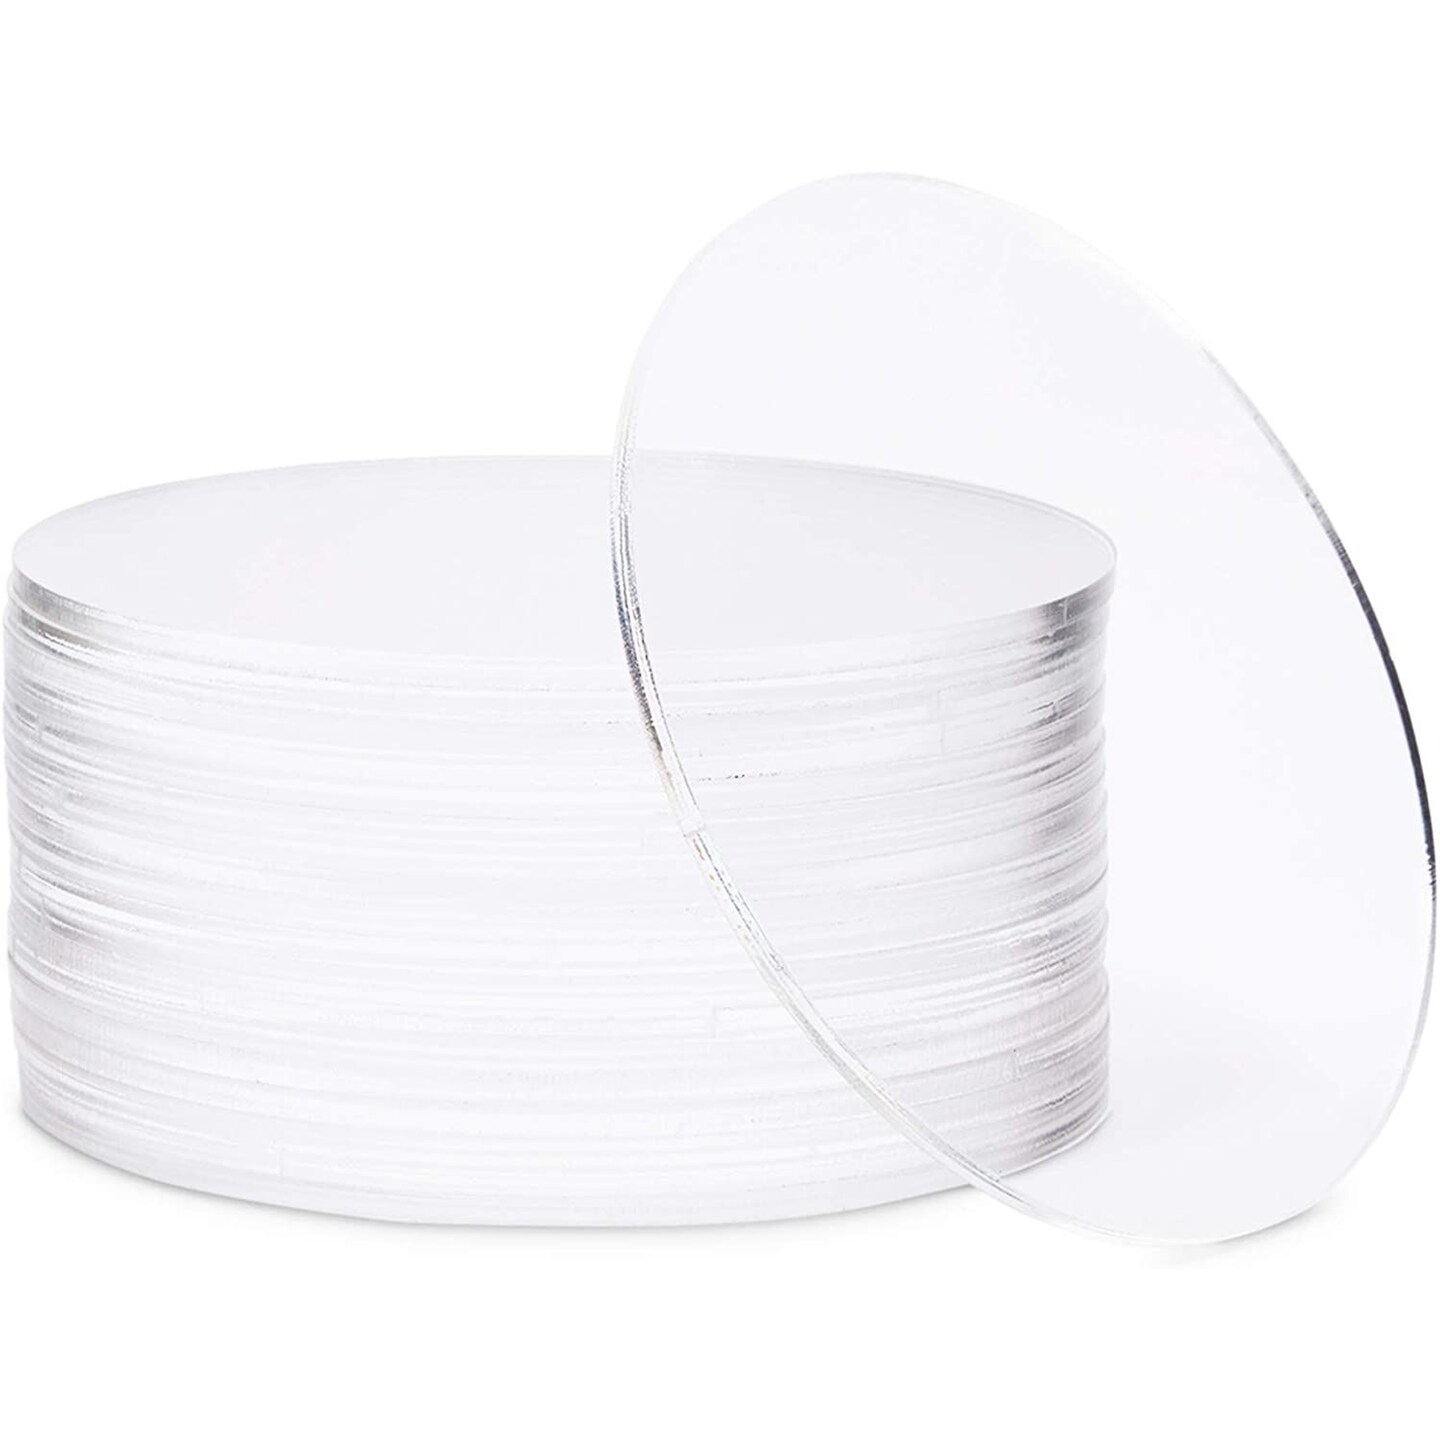 4 101mm (2 Pack) Acrylic disc 22 color acrylic round Craft Disk plexiglass